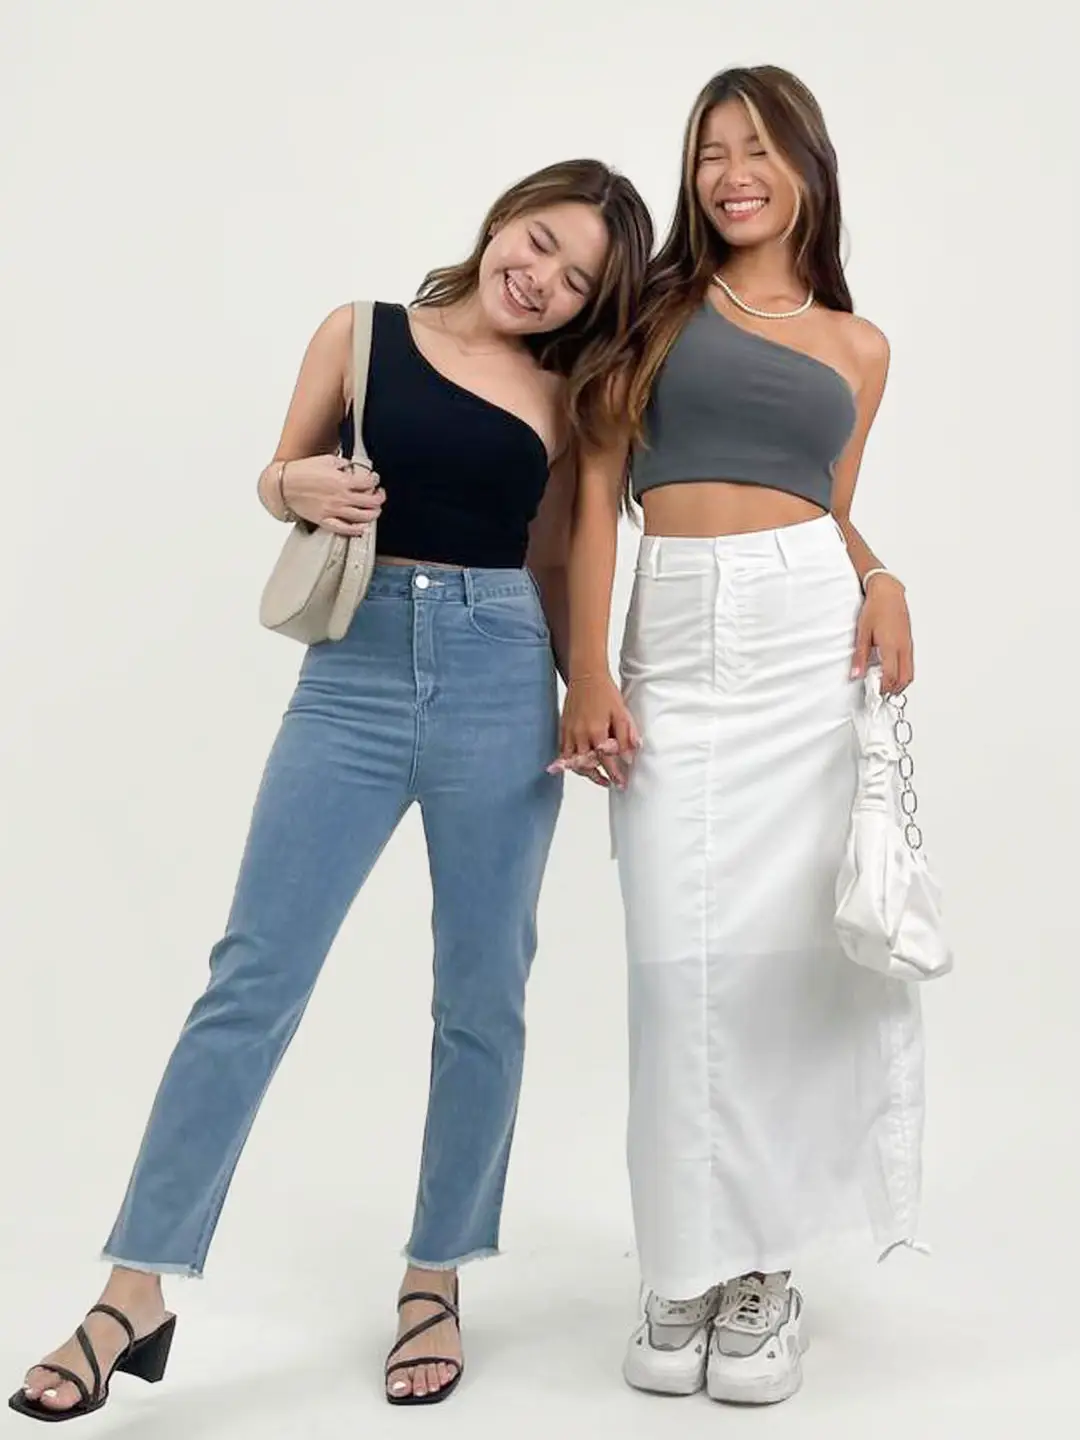 SHOPEE] Chio Toga Sports Bra Under $20!!!, Video published by nicolechowww